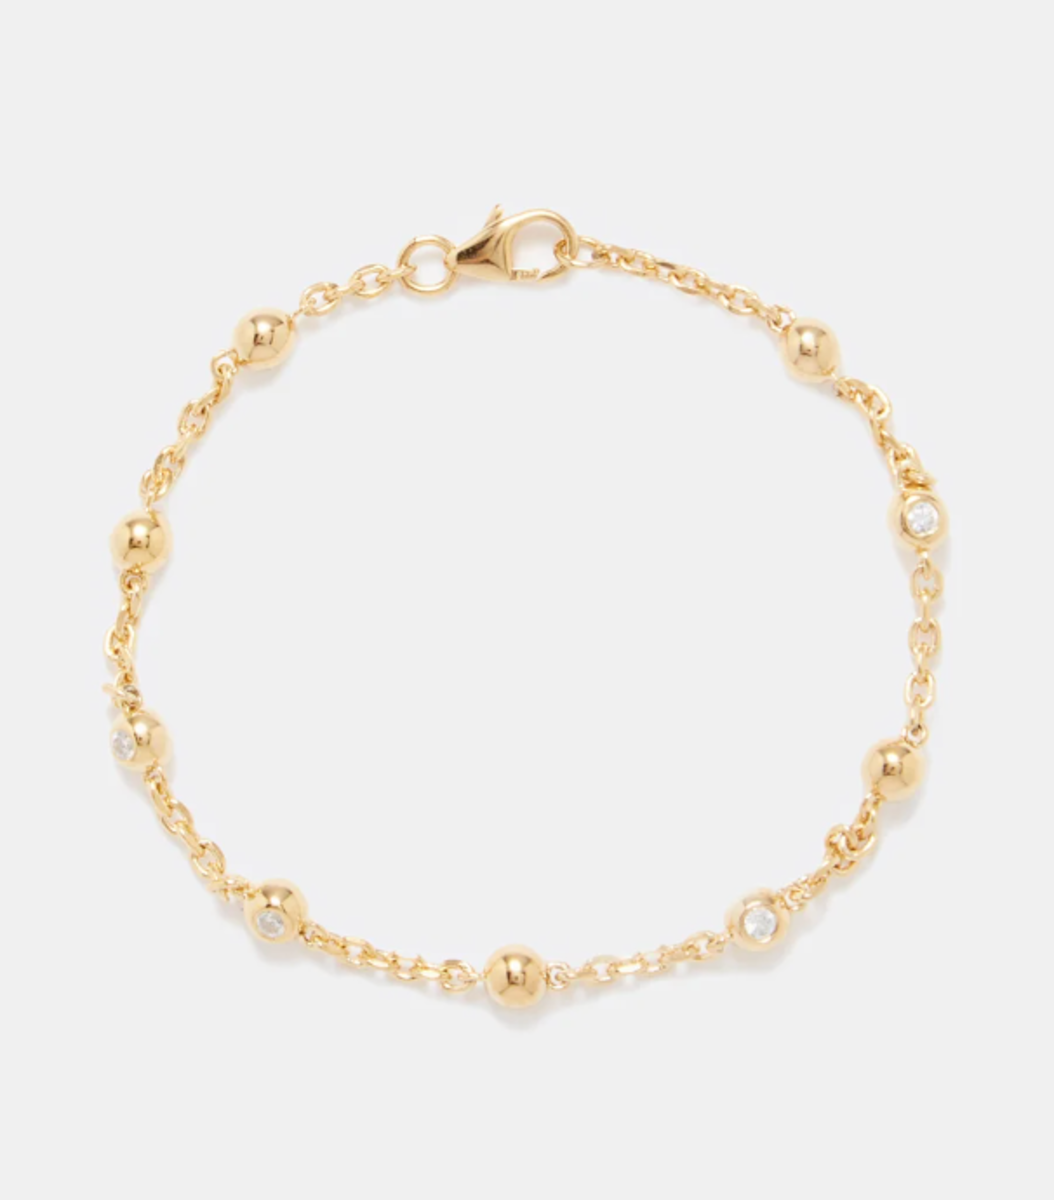 Womens gold bracelets can be a fun and creative way to enhance your outfit and add a touch of elegance to your overall look.